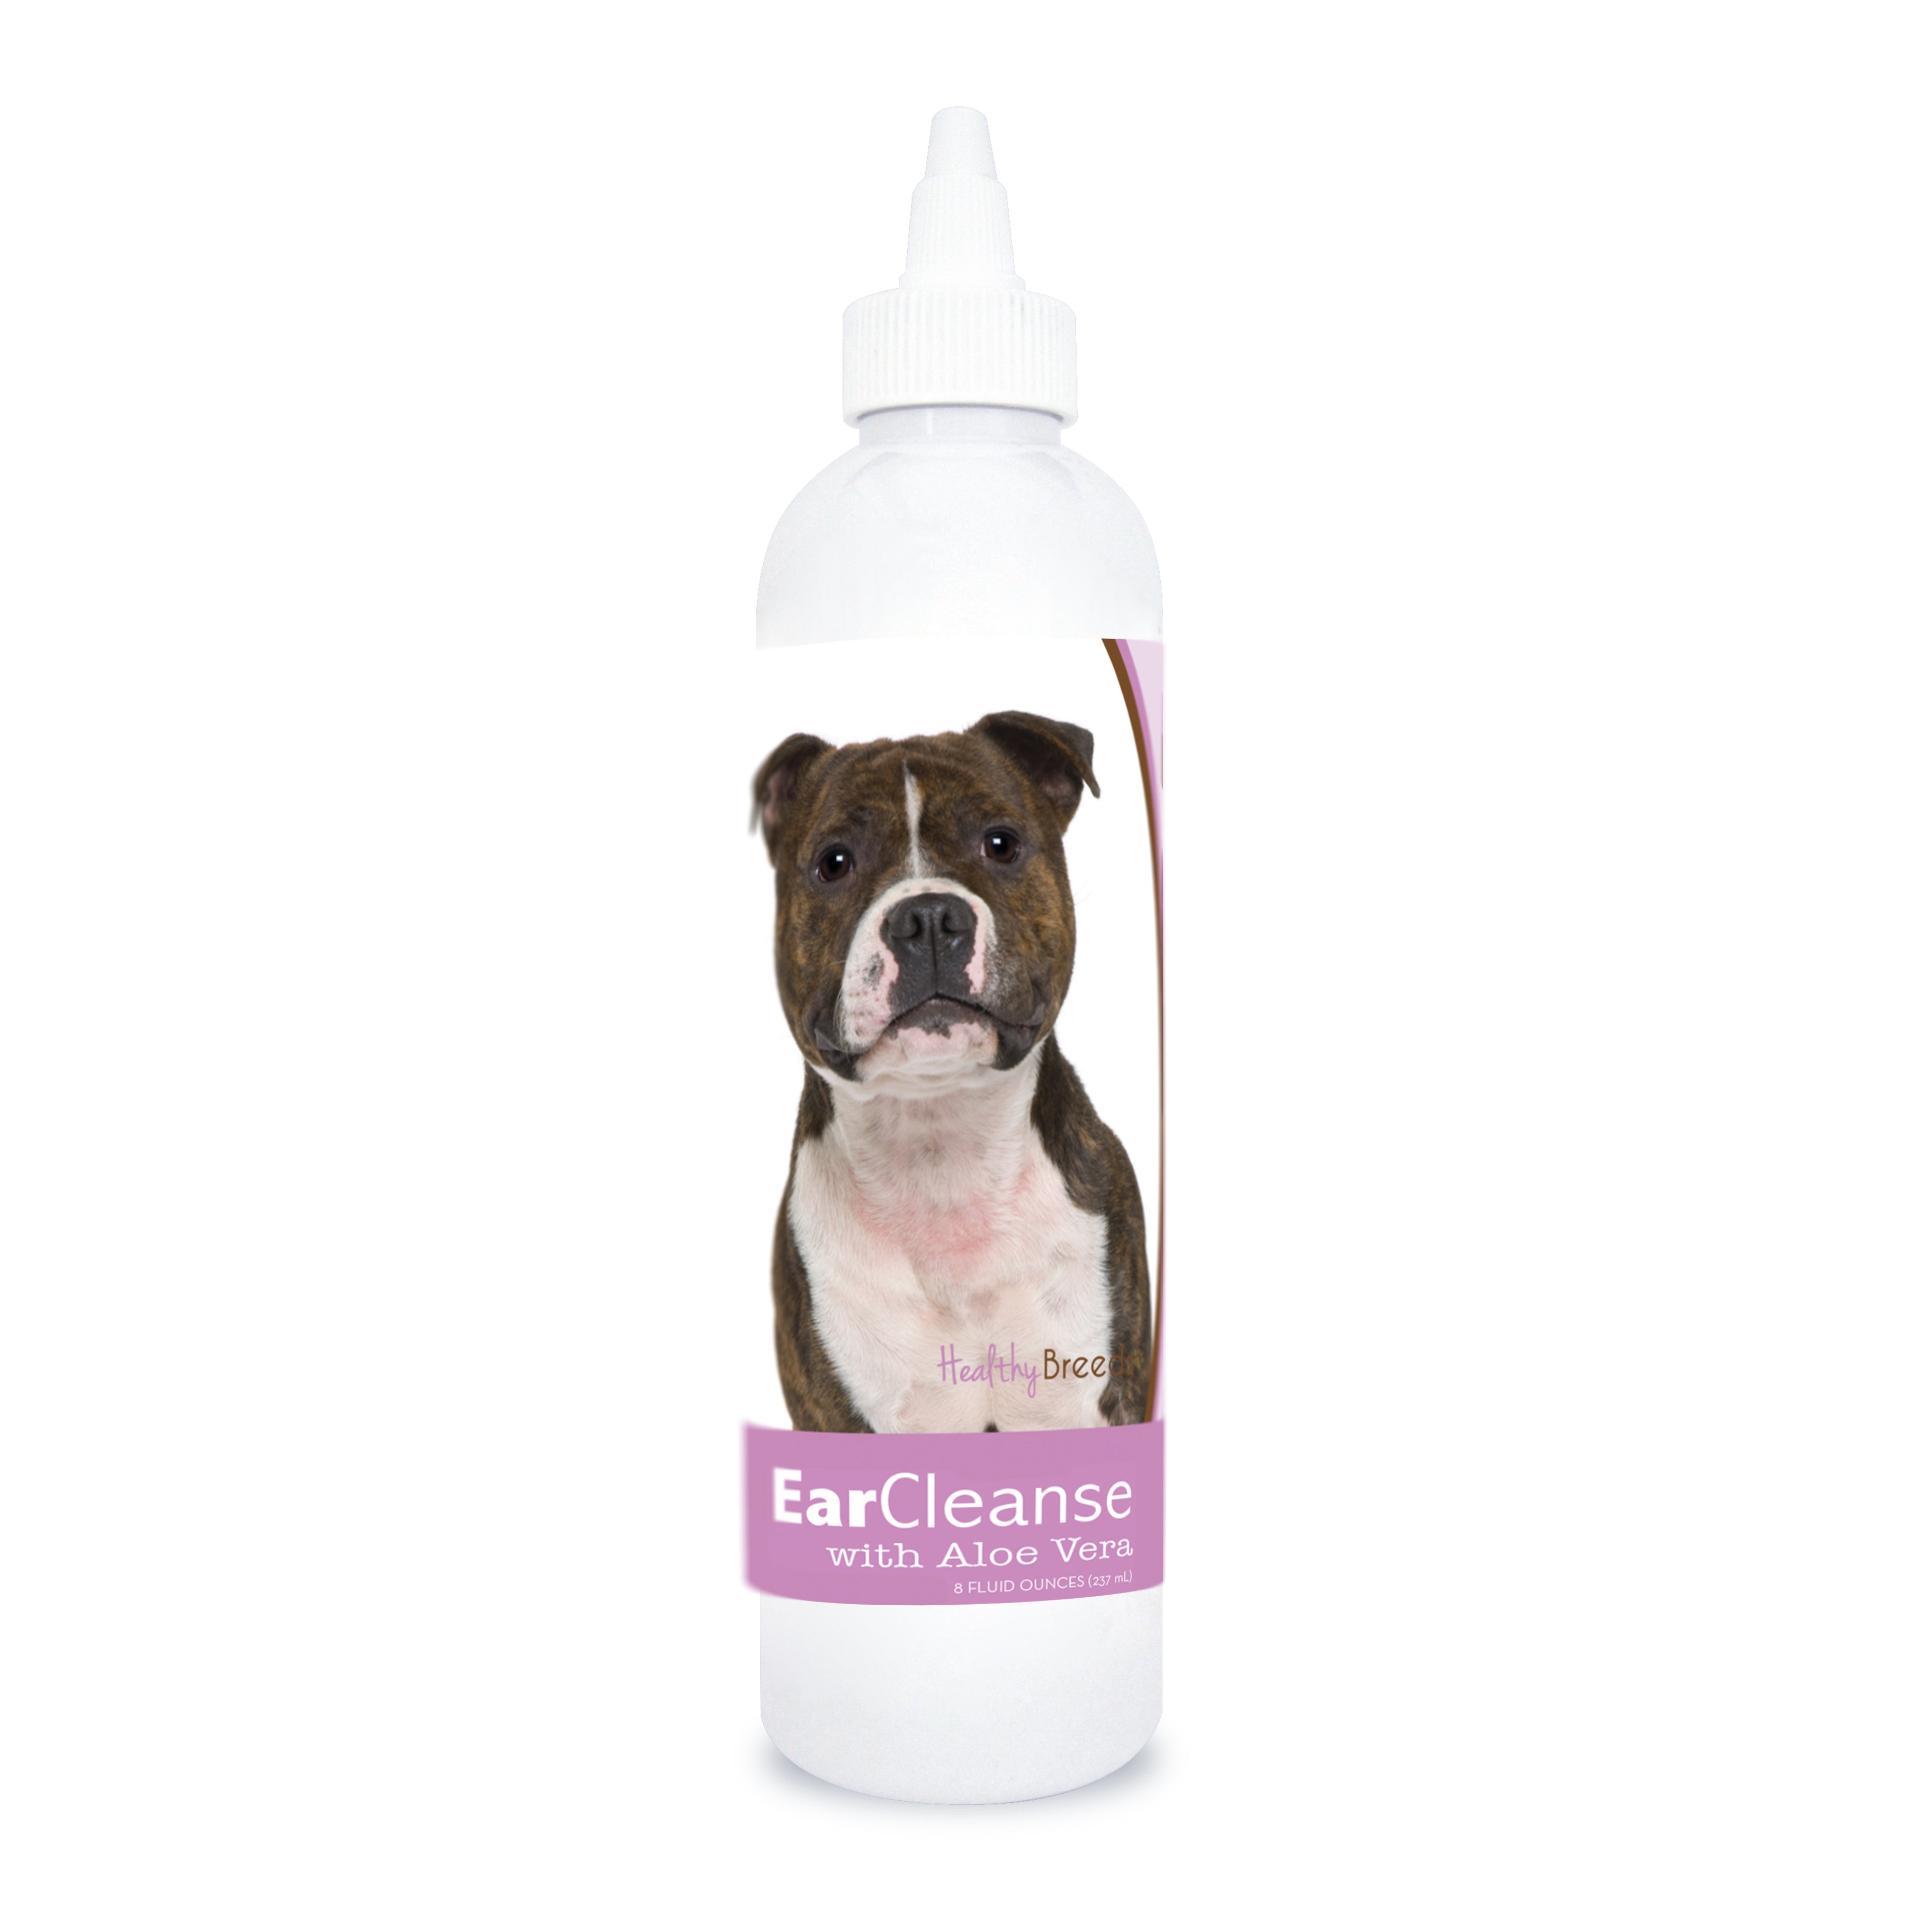 Staffordshire Bull Terrier Ear Cleanse with Aloe Vera Sweet Pea and Vanilla 8 oz